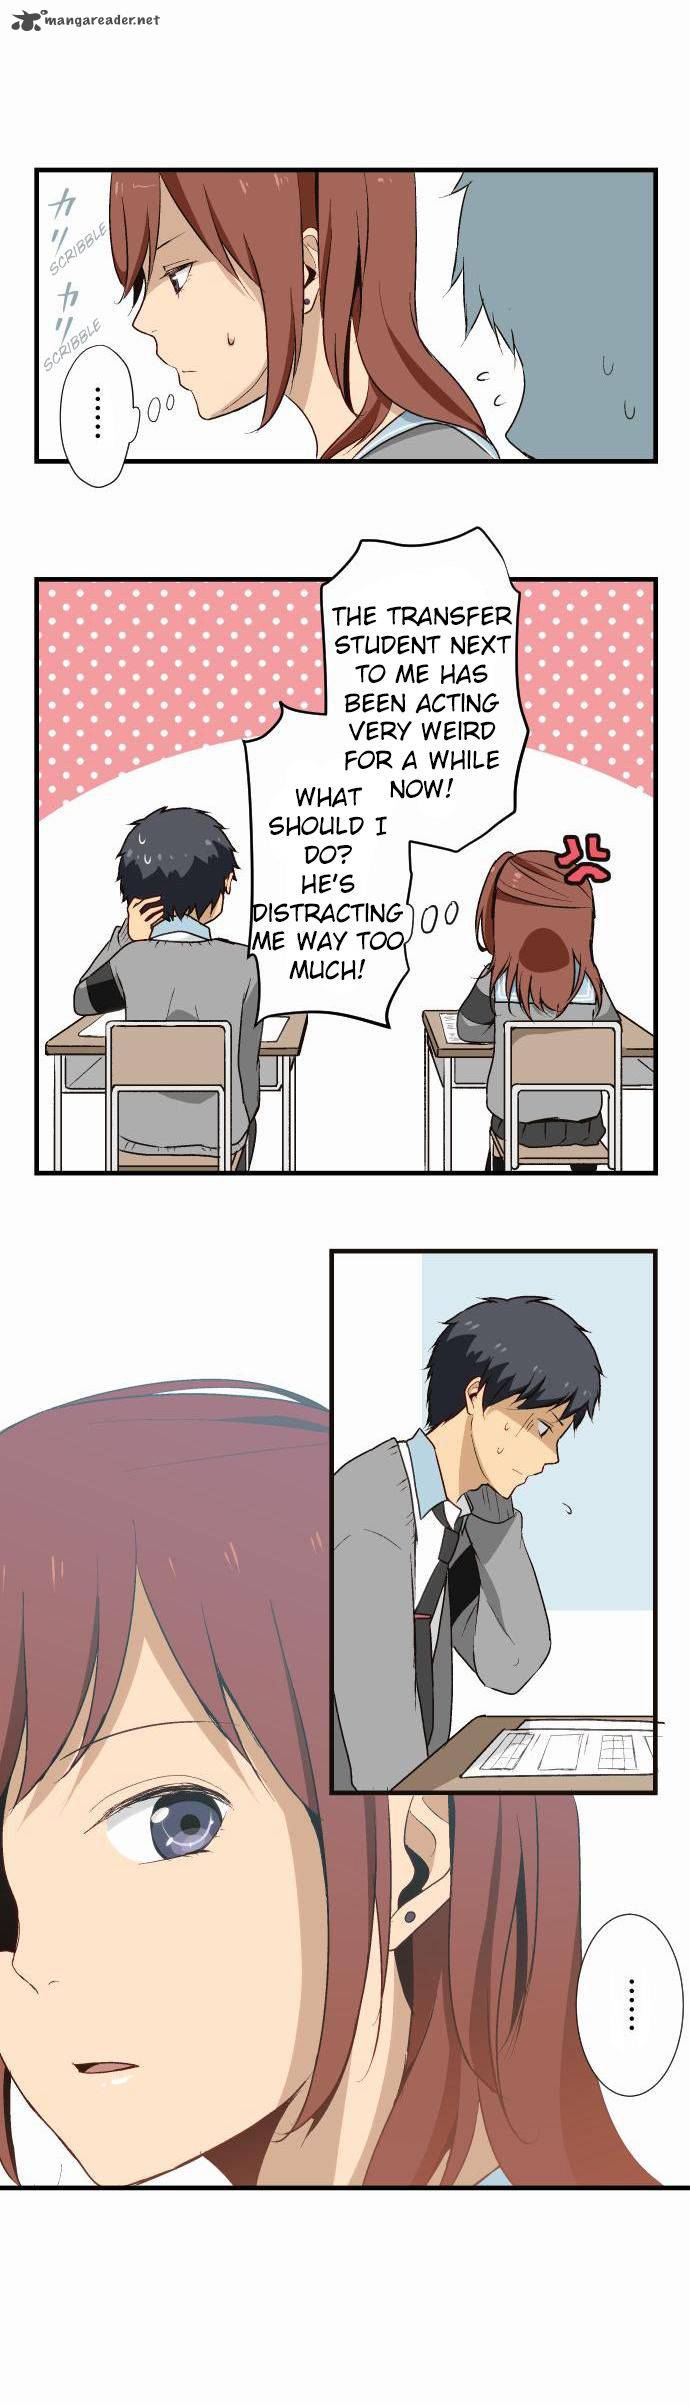 Relife 10 15